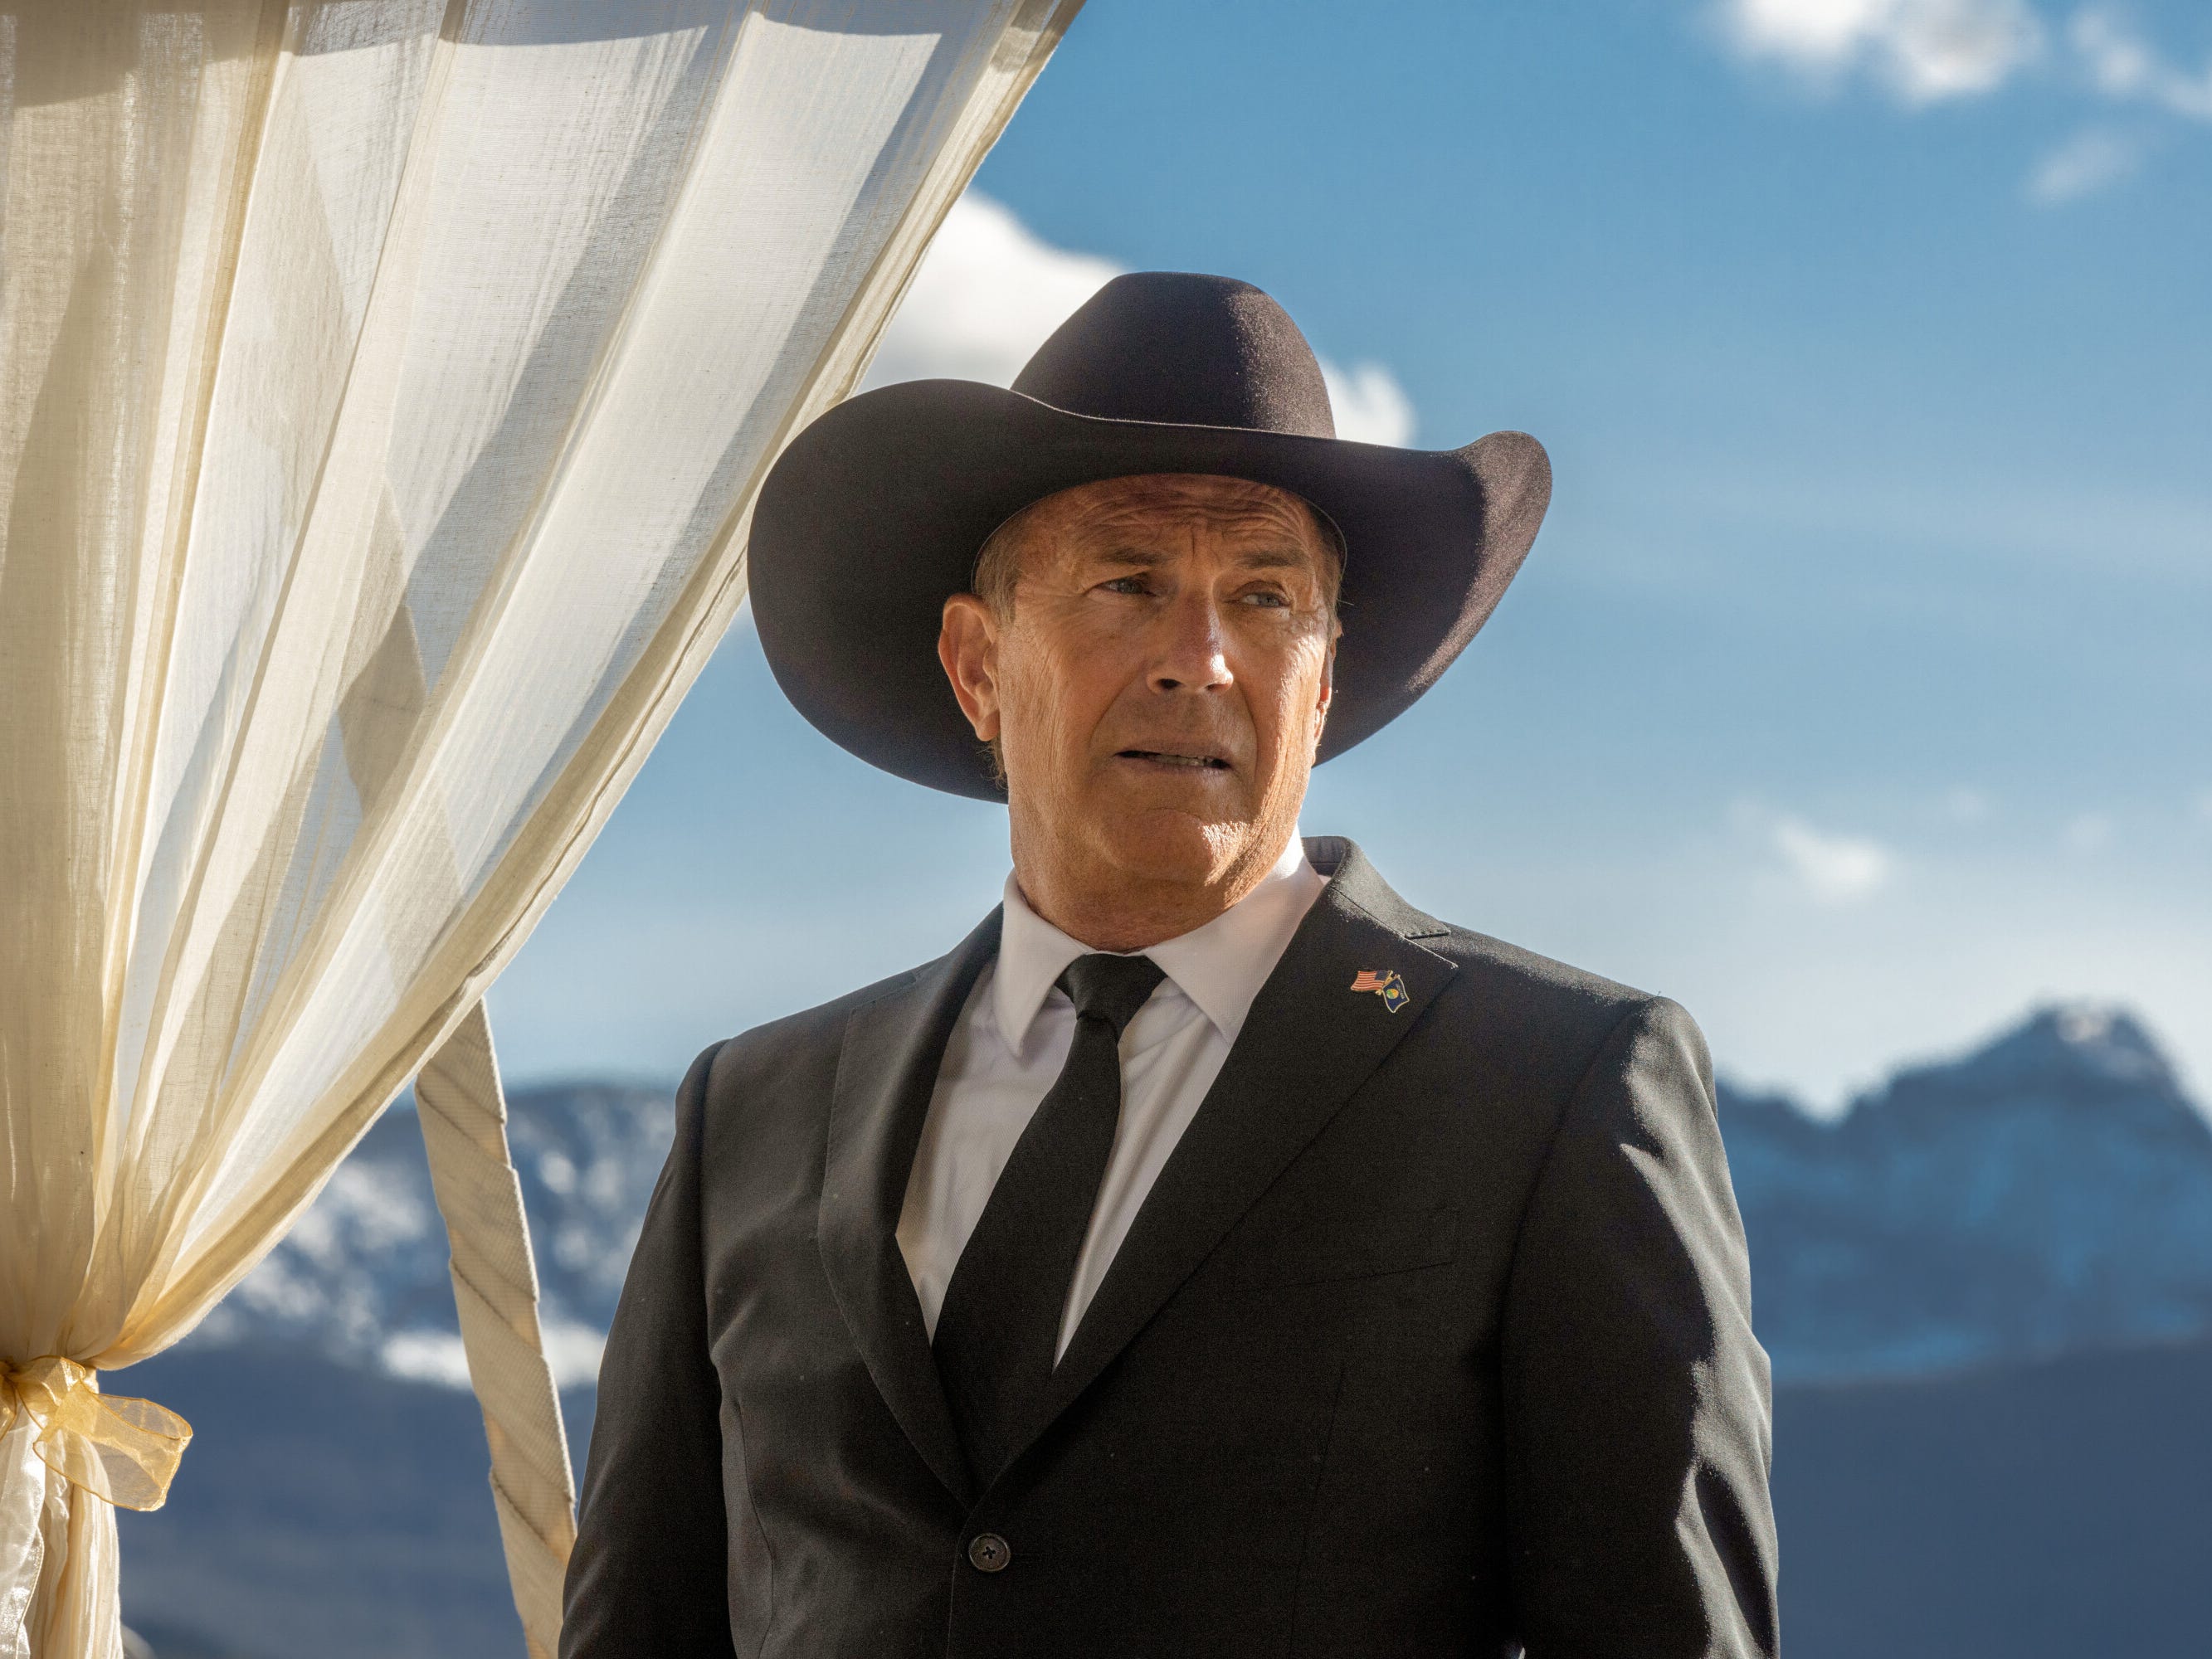 Kevin Costner als John Dutton in „Yellowstone“.